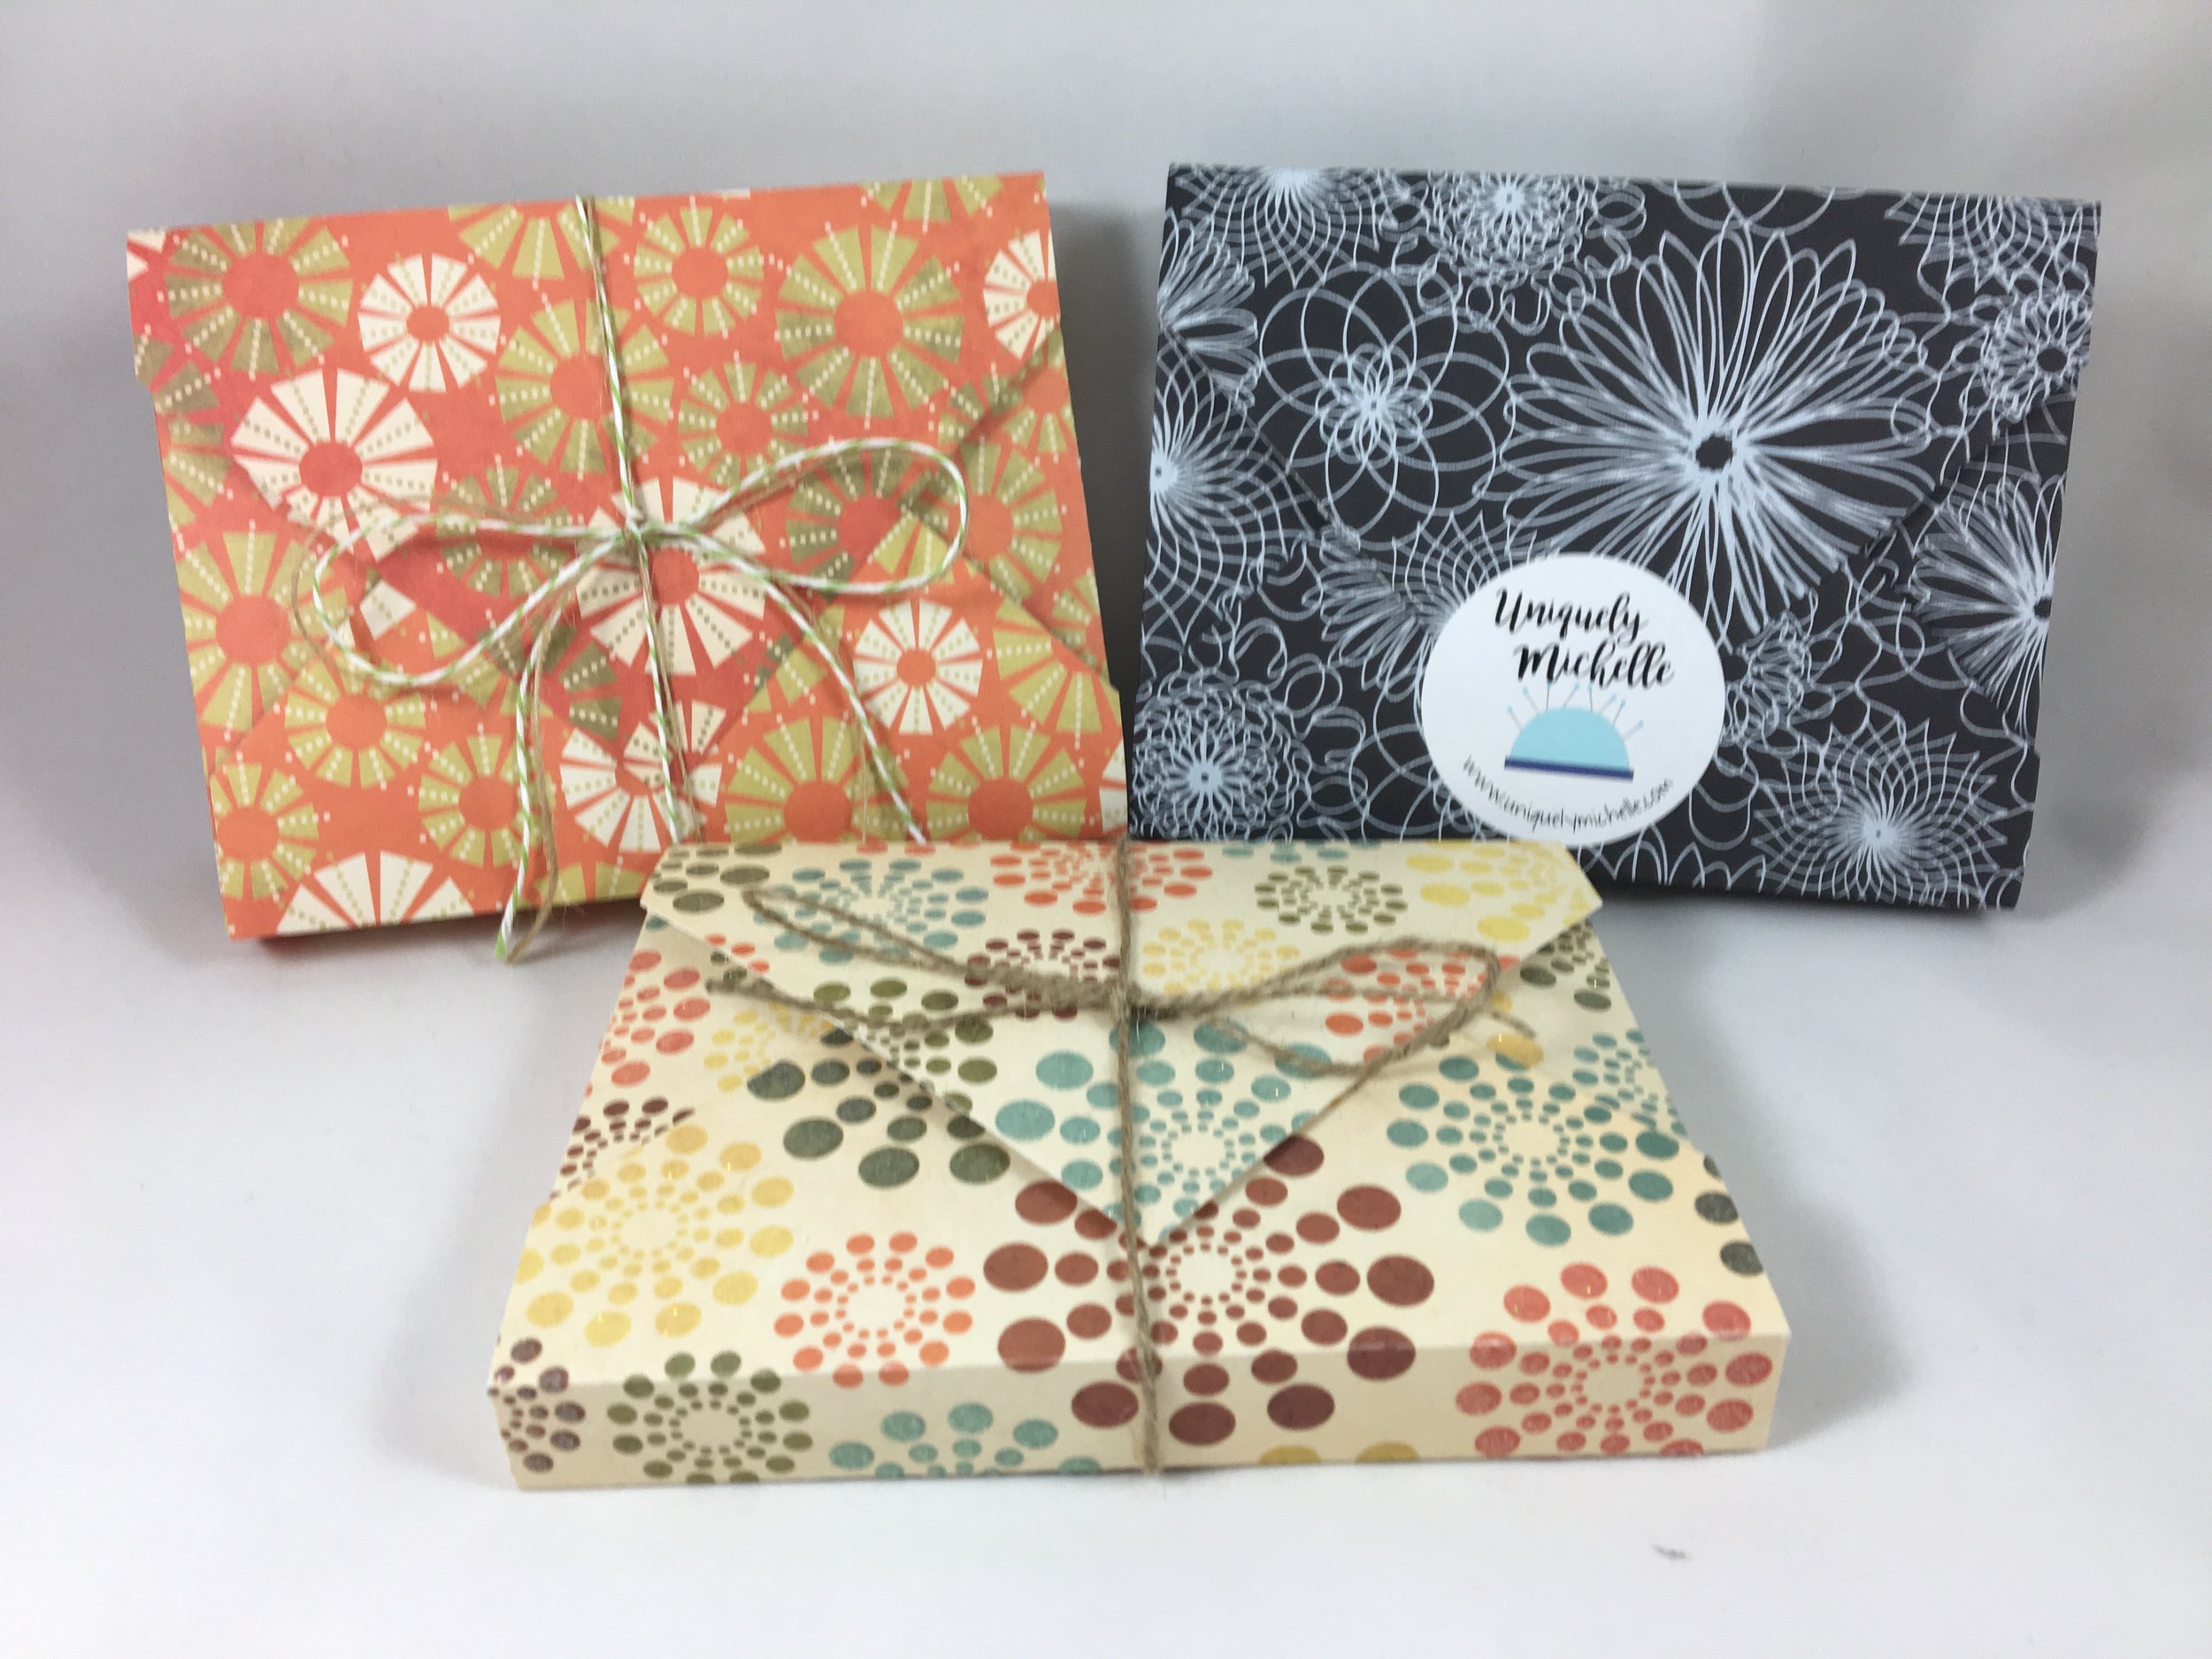 3 Ways to Create Your Own Wrapping Paper – Craft Box Girls